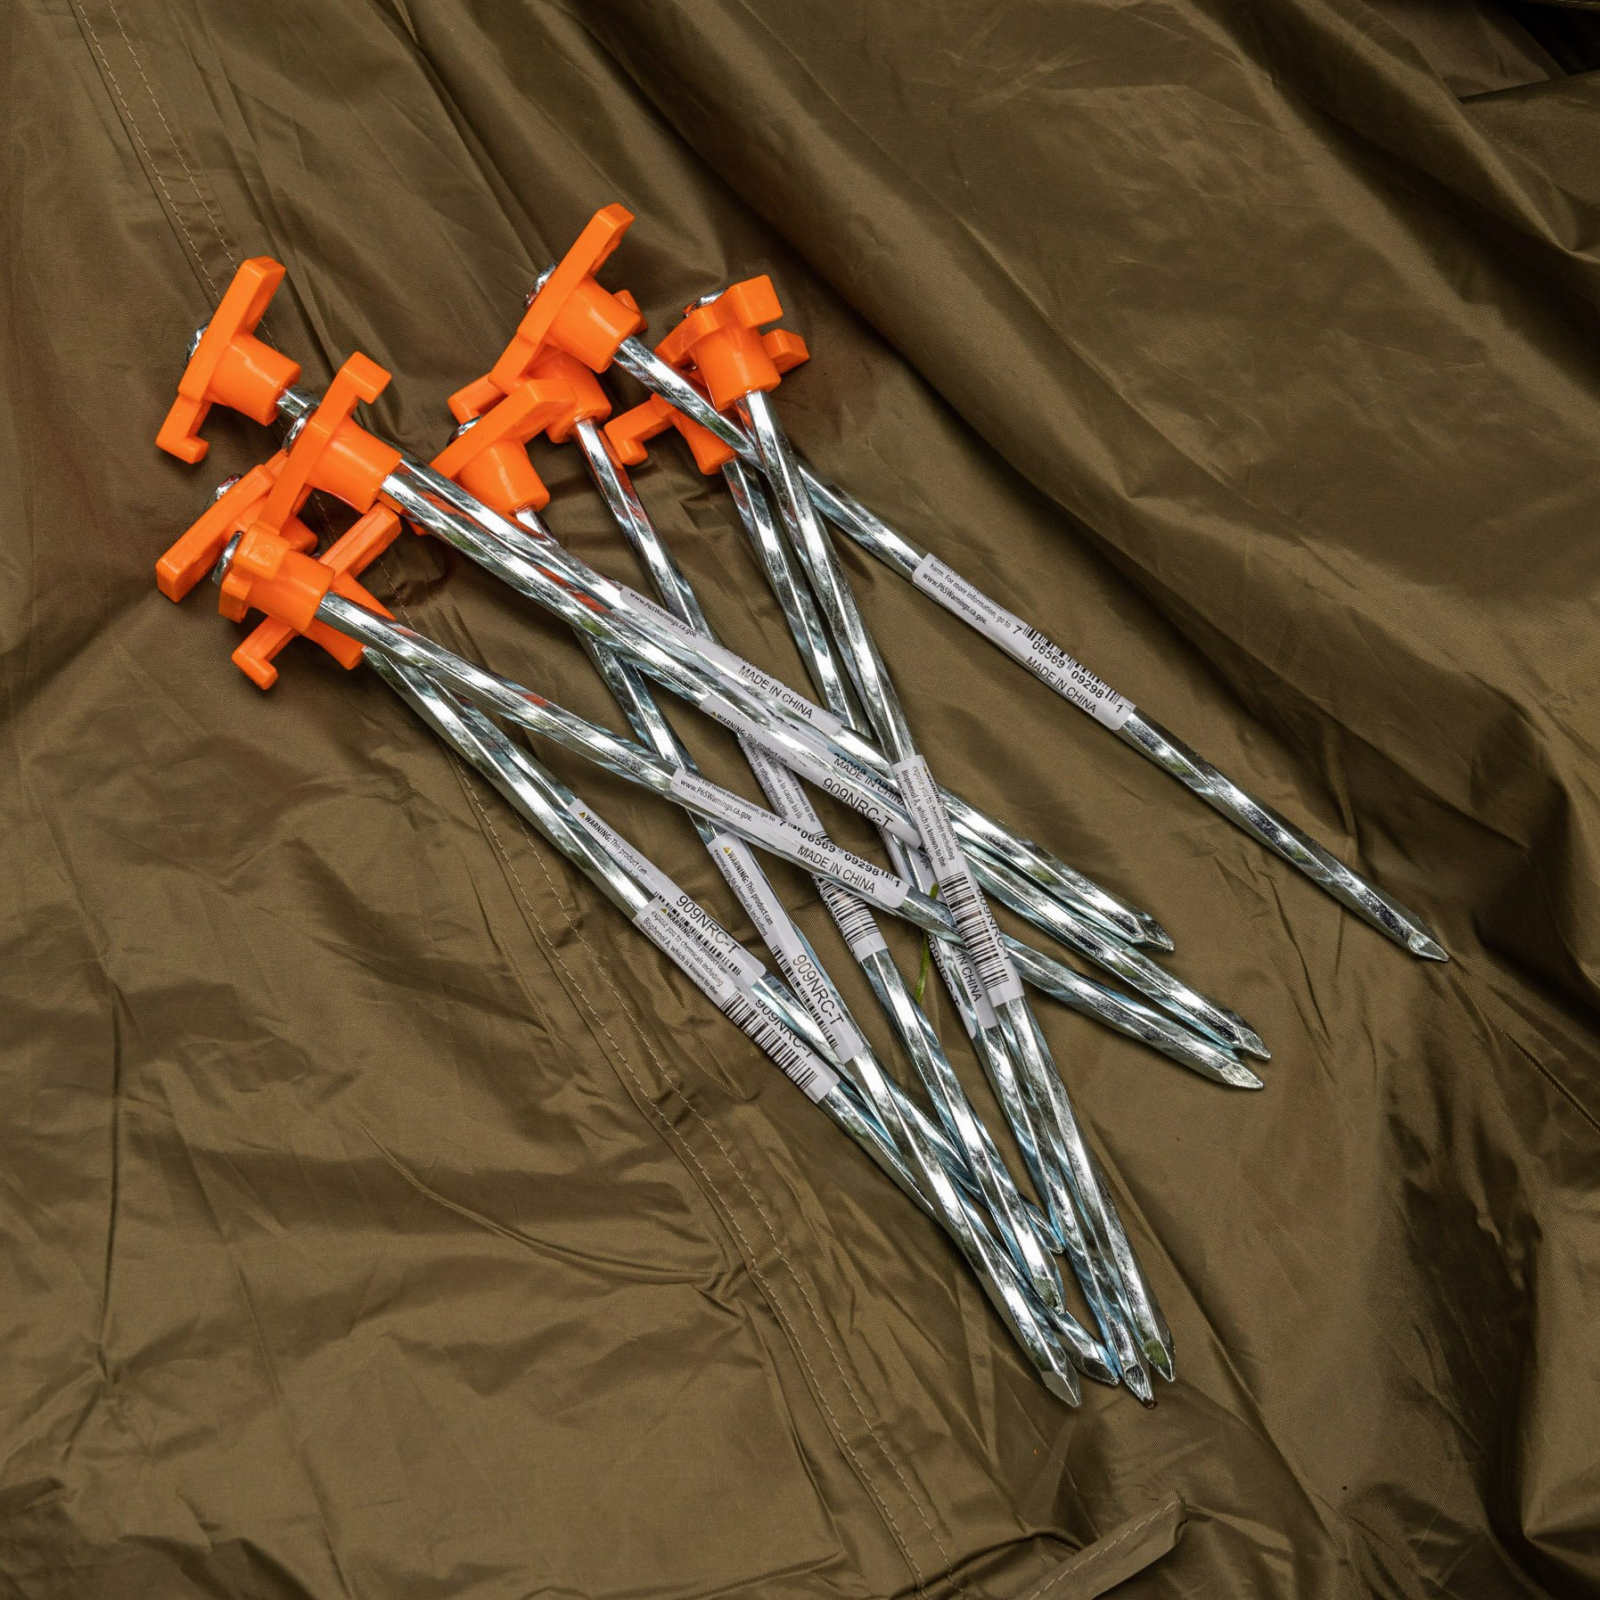 (6 Pack) ASR Outdoor Orange Universal Galvanized Twisted Metal PVC Camping Gear Canopy Tent Stakes - image 4 of 7